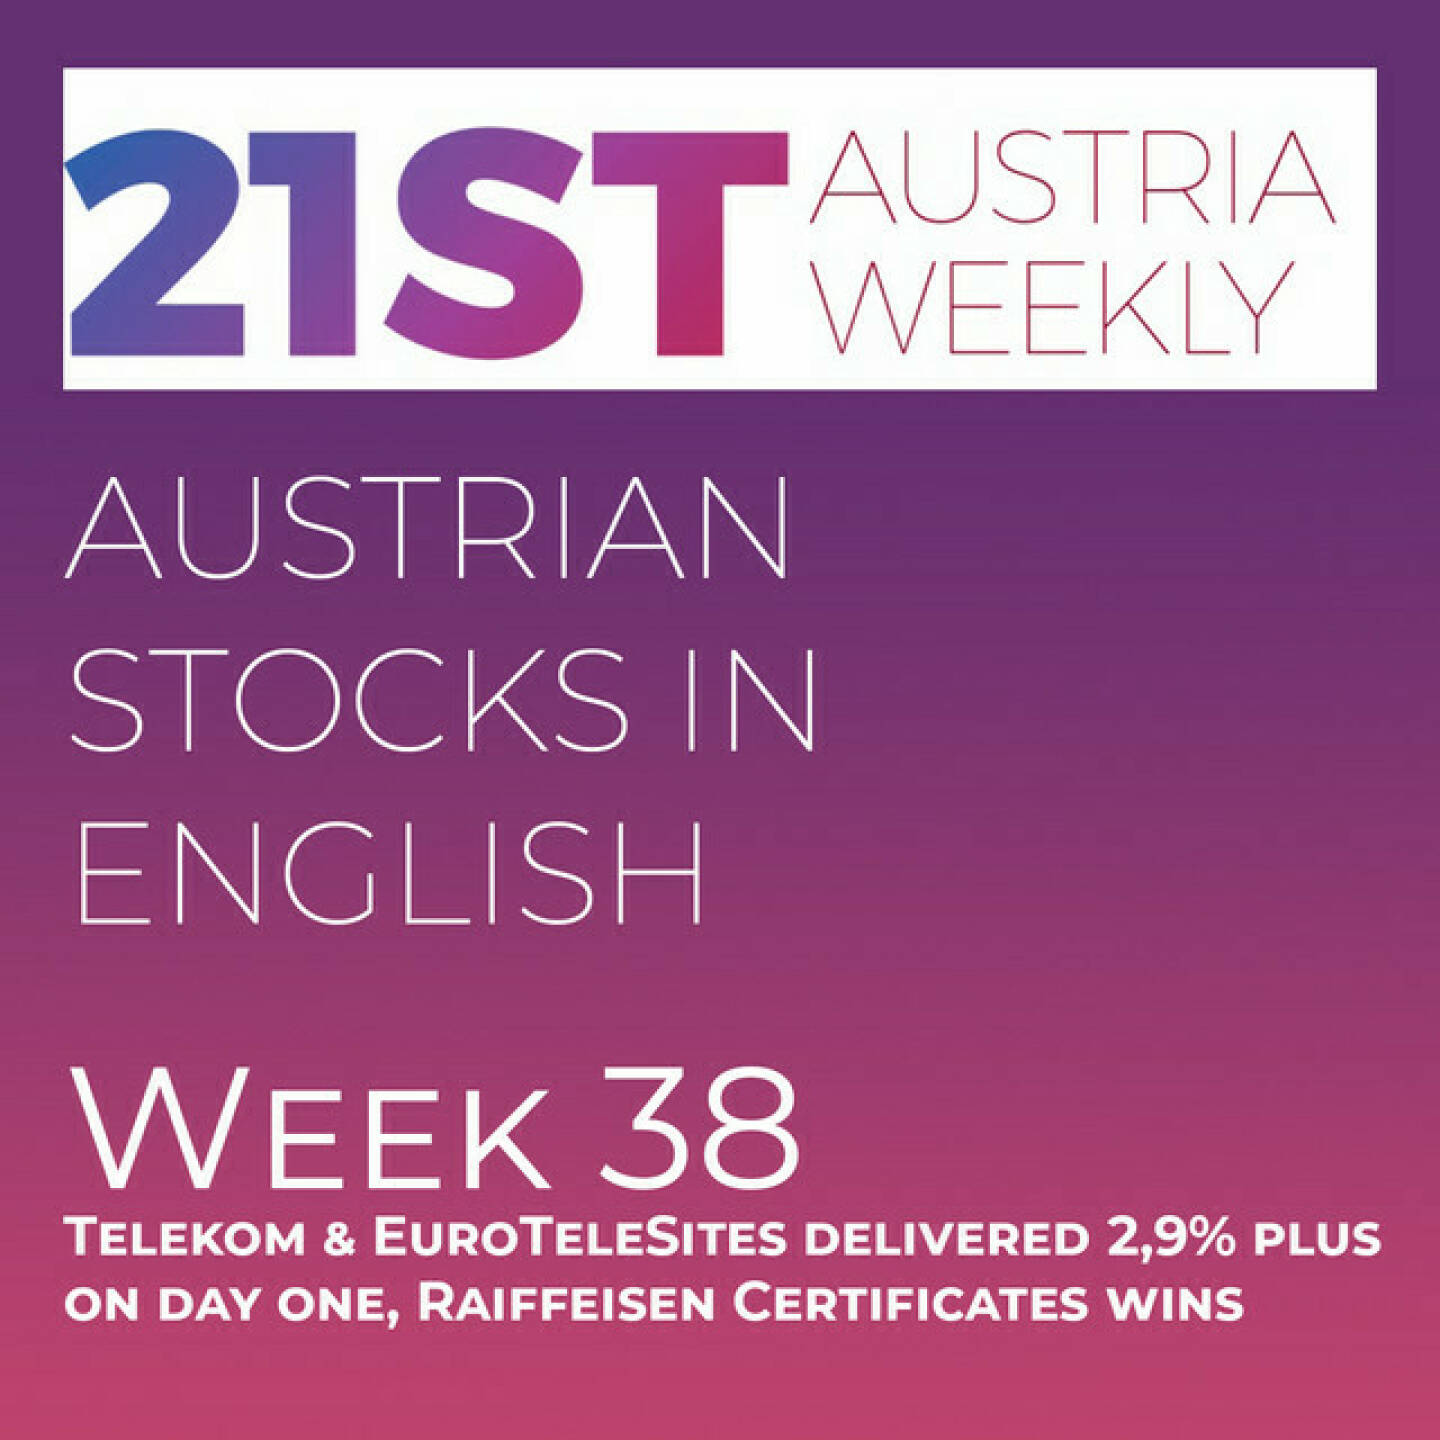 https://open.spotify.com/episode/4O4d7H6DWcRqXDEp4wyZEt
Austrian Stocks in English: Telekom & EuroTeleSites delivered 2,9% plus on day one, Raiffeisen Certificates wins - <p>Welcome  to &#34;Austrian Stocks in English - presented by Palfinger&#34;, the english spoken weekly Summary for the Austrian Stock Market,  positioned every Sunday in the mostly german languaged Podcast &#34;Audio-CD.at Indie Podcasts&#34;- Wiener Börse, Sport Musik und Mehr“ .<br/><br/>The following script ist based on our 21st Austria weekly: Week 38 was another week with losses on the Austrian Stock Market, but Telekom Austria did the Spin-Off of EuroTeleSites on Friday.The calculation showed that 100 on Thursday (TKA only) became 102.9 at the end of Friday (TKA and ETS solo, but calculated combined). ETS was for one day in the ATX. <br/><br/>And: Raiffeisen won the 17th Zertifikate Awards Austria for the first time under the brand Raiffeisen Certificates, the Institute was a 16 time former champion under the brand Raiffeisen Centrobank. <br/><br/>News came from Kontron, EVN, Lenzing, Wolftank, Andritz,  Kapsch TrafficCom, Frequentis, ams Osram, Andritz, RBI, Lenzing, Valneva, Kapsch TrafficCom and EuroTeleSites, spoken by the absolutely smart Alison. <br/><br/><a href=https://boerse-social.com/21staustria target=_blank>https://boerse-social.com/21staustria</a><br/><br/>Please rate my Podcast on Apple Podcasts (or Spotify): <a href=https://podcasts.apple.com/at/podcast/audio-cd-at-indie-podcasts-wiener-boerse-sport-musik-und-mehr/id1484919130 target=_blank>https://podcasts.apple.com/at/podcast/audio-cd-at-indie-podcasts-wiener-boerse-sport-musik-und-mehr/id1484919130</a> .And please spread the word : <a href=https://www.boerse-social.com/21staustria target=_blank>https://www.boerse-social.com/21staustria</a> - the address to subscribe to the weekly summary as a PDF.</p>